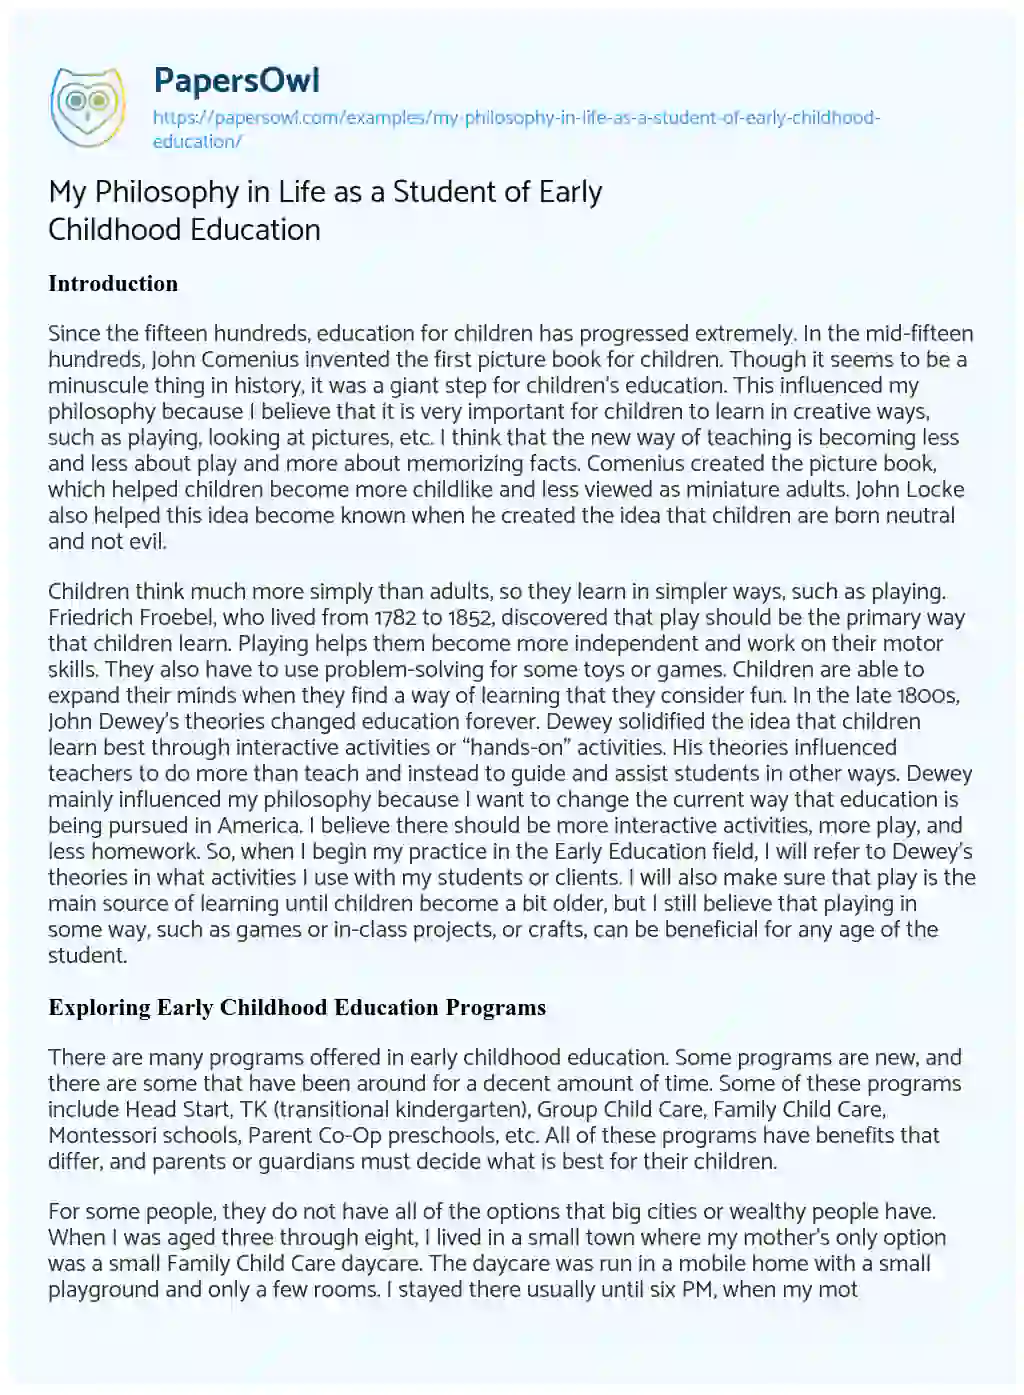 Essay on My Philosophy in Life as a Student of Early Childhood Education